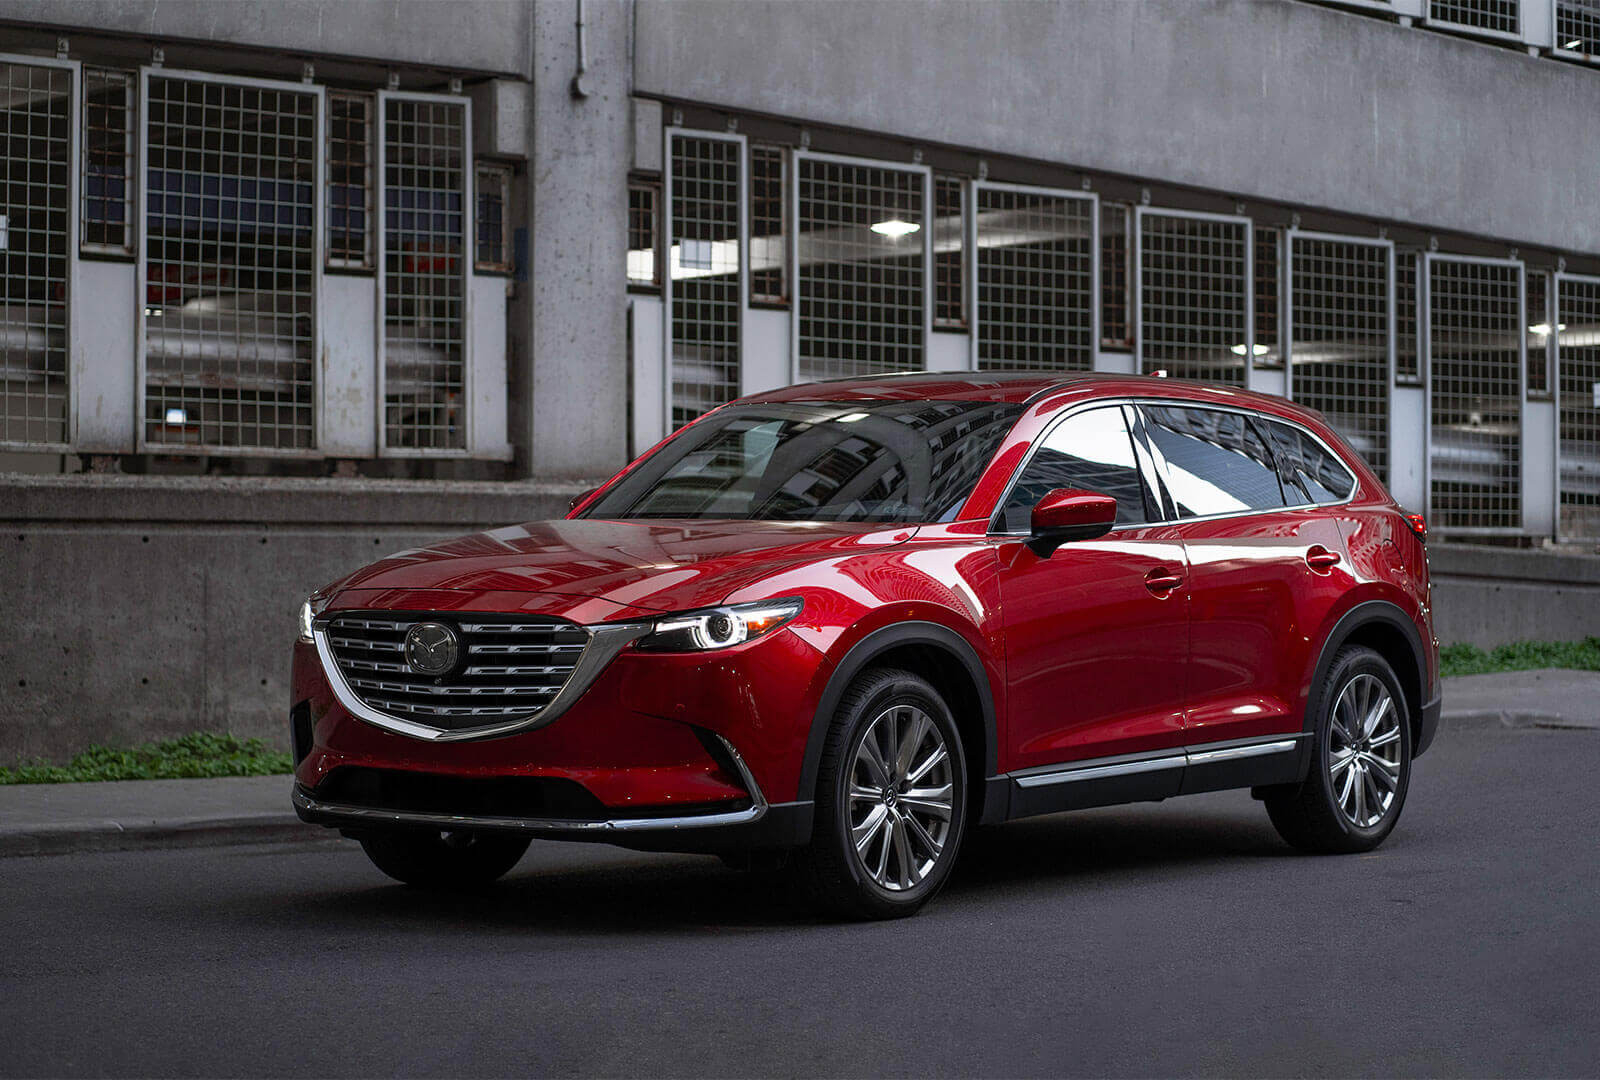 2023 Mazda Cx 9S Review and Release date